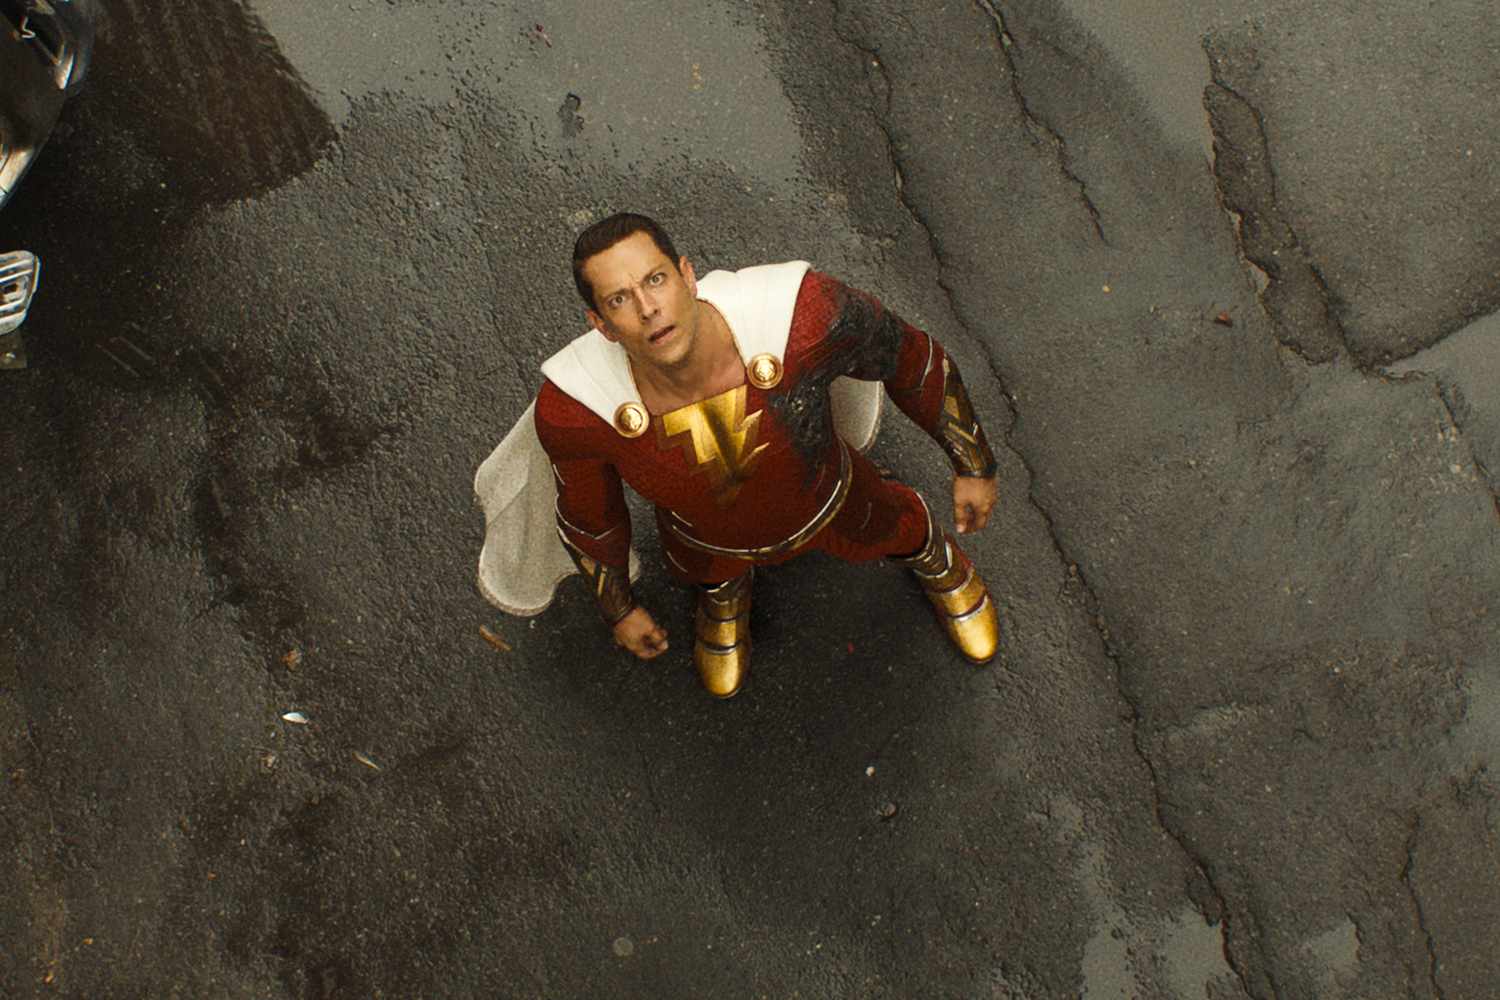 SHAZAM! FURY OF THE GODS Copyright: © 2023 Warner Bros. Entertainment Inc. All Rights Reserved. Photo Credit: Courtesy Warner Bros. Pictures Caption: ZACHARY LEVI as Shazam in New Line Cinema’s action adventure “SHAZAM! FURY OF THE GODS,” a Warner Bros. Pictures release.